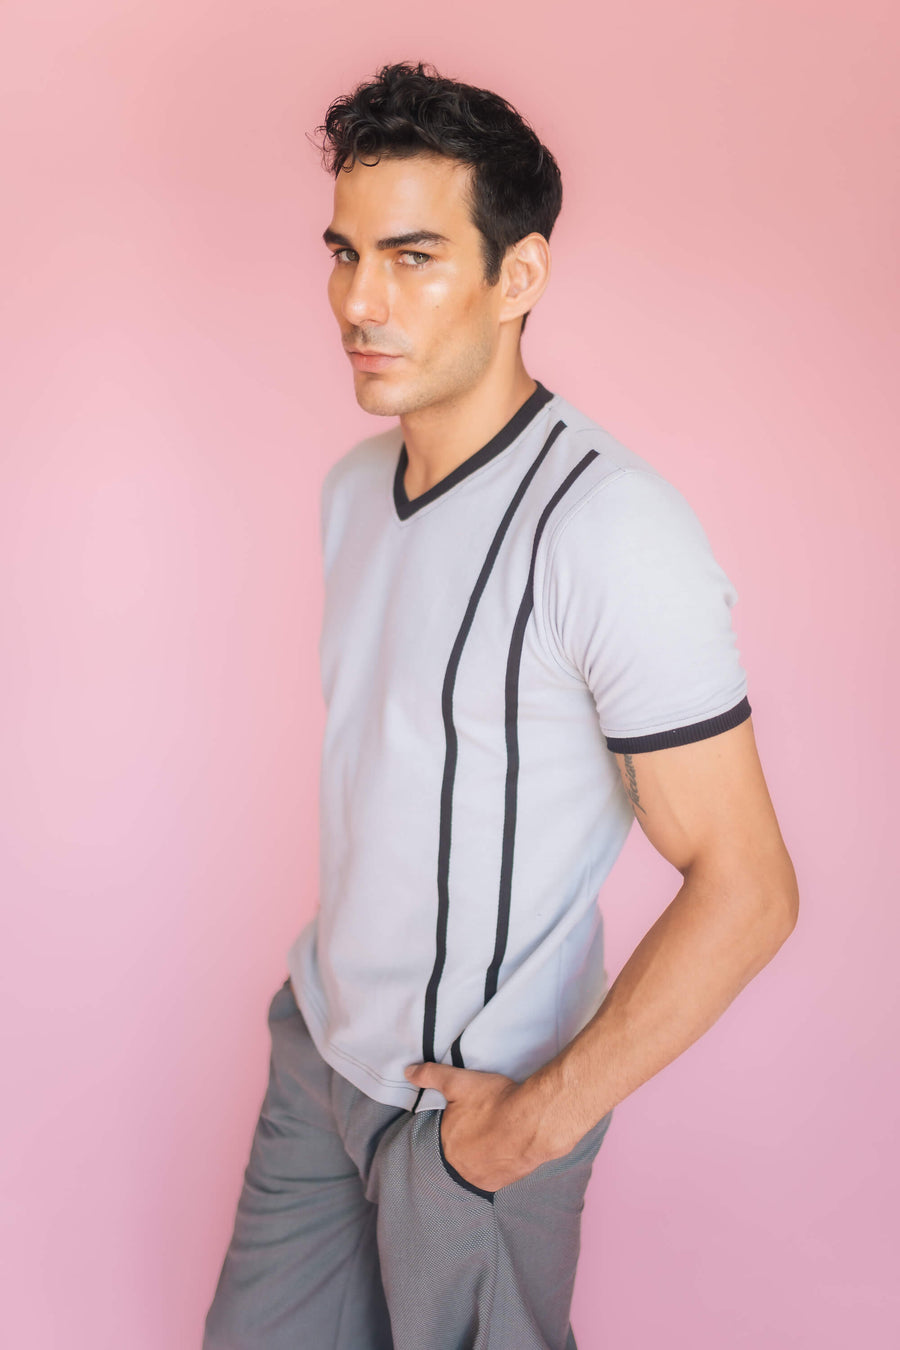 Lateral T-shirt Vintage fit gris y negro 